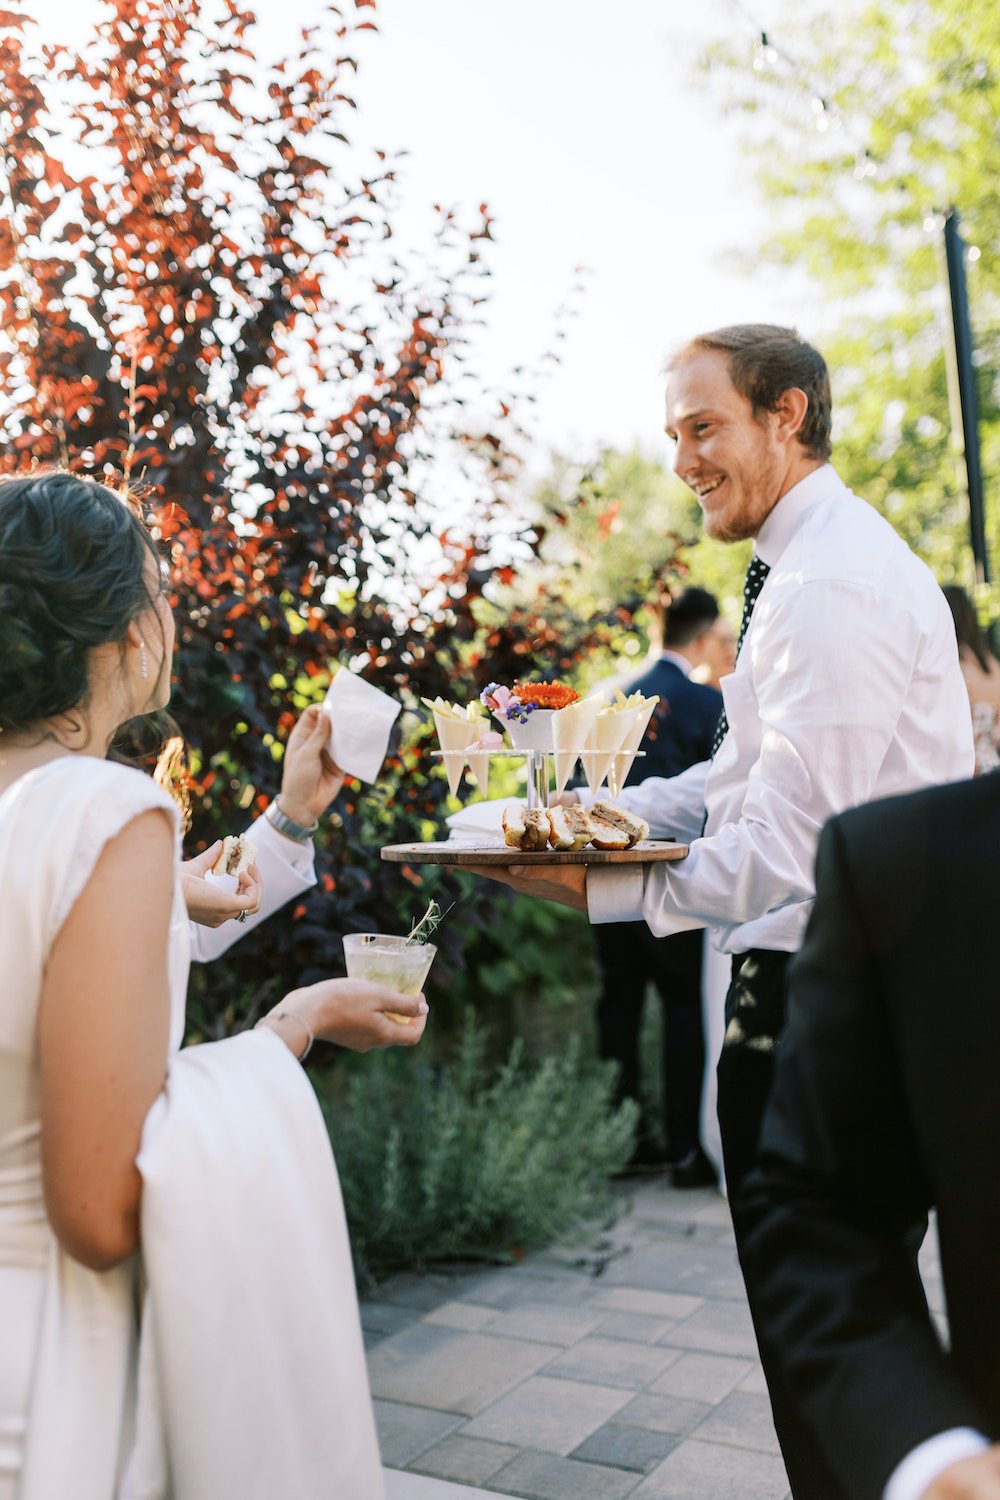 Cocktail hour catering at a backyard wedding in Los Angeles.